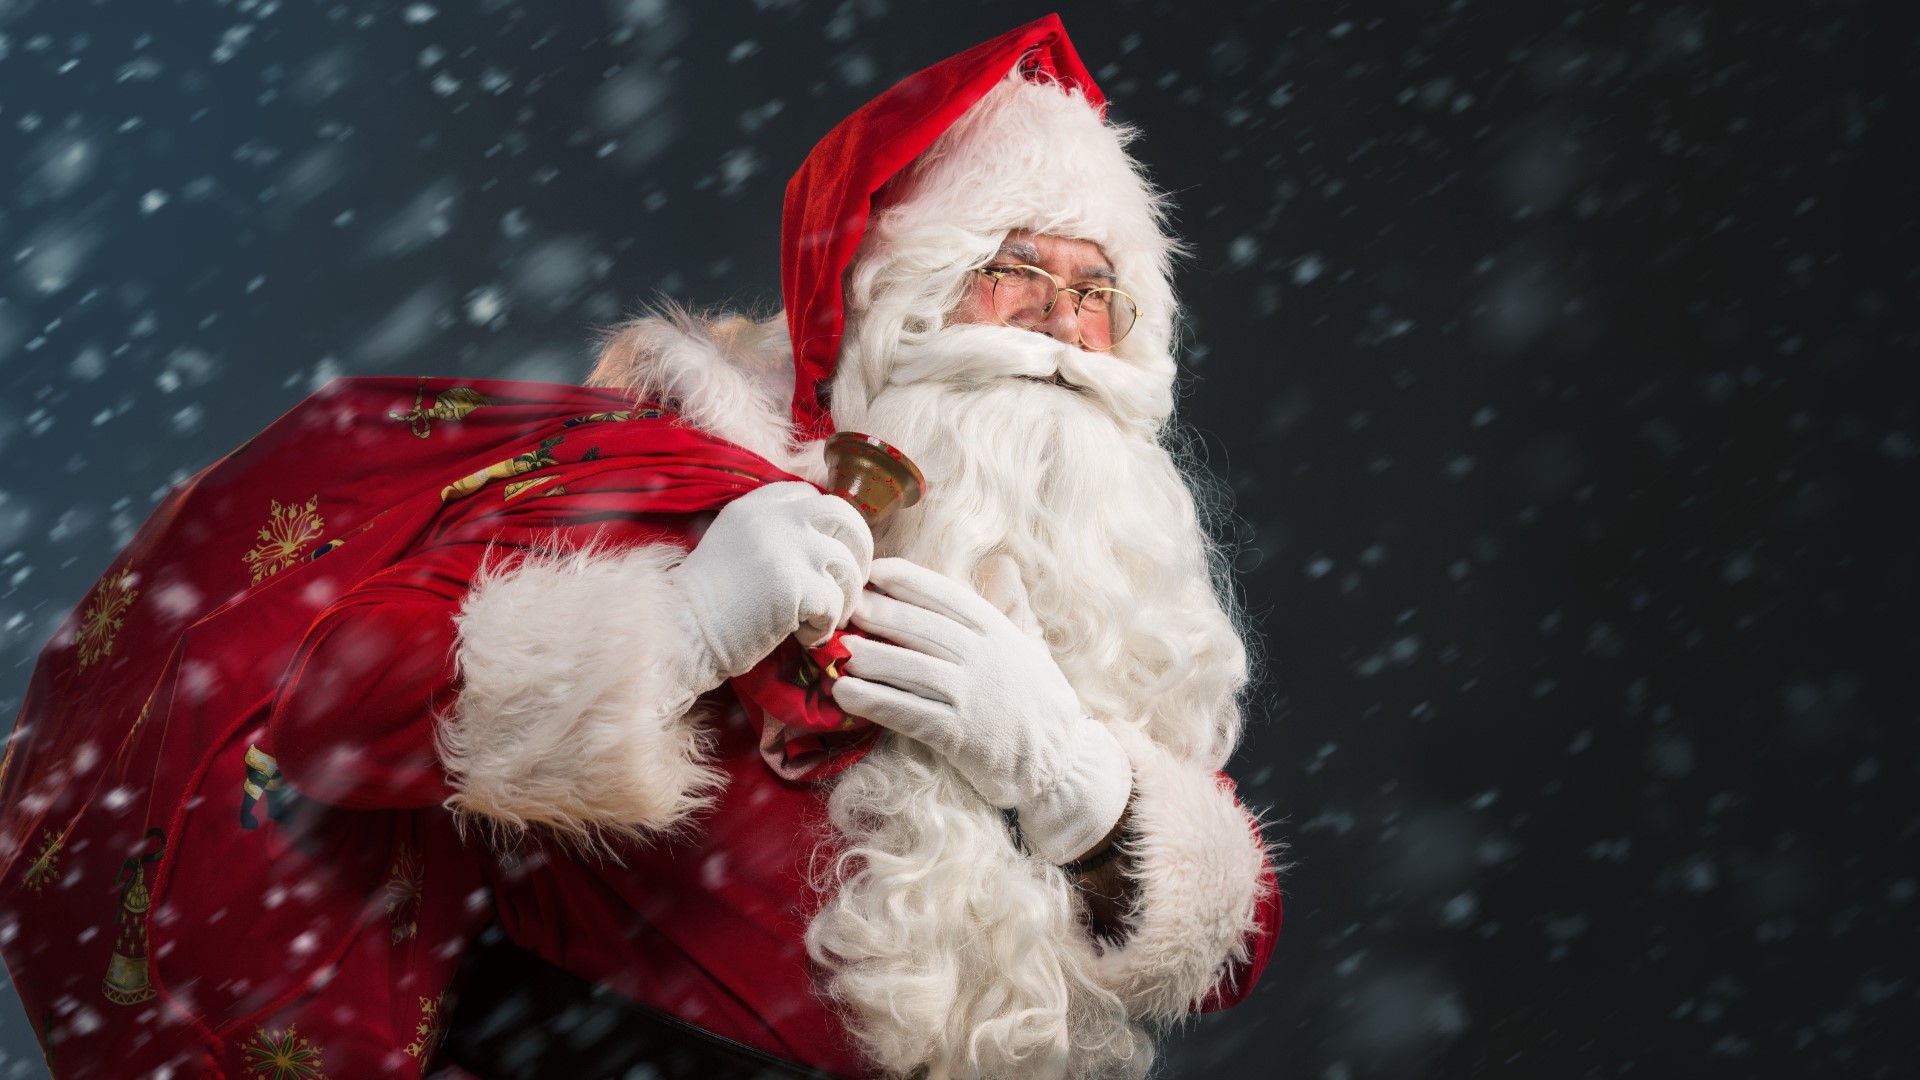 He's back! Santa Claus is making his return to SouthPark Mall in Strongsville.